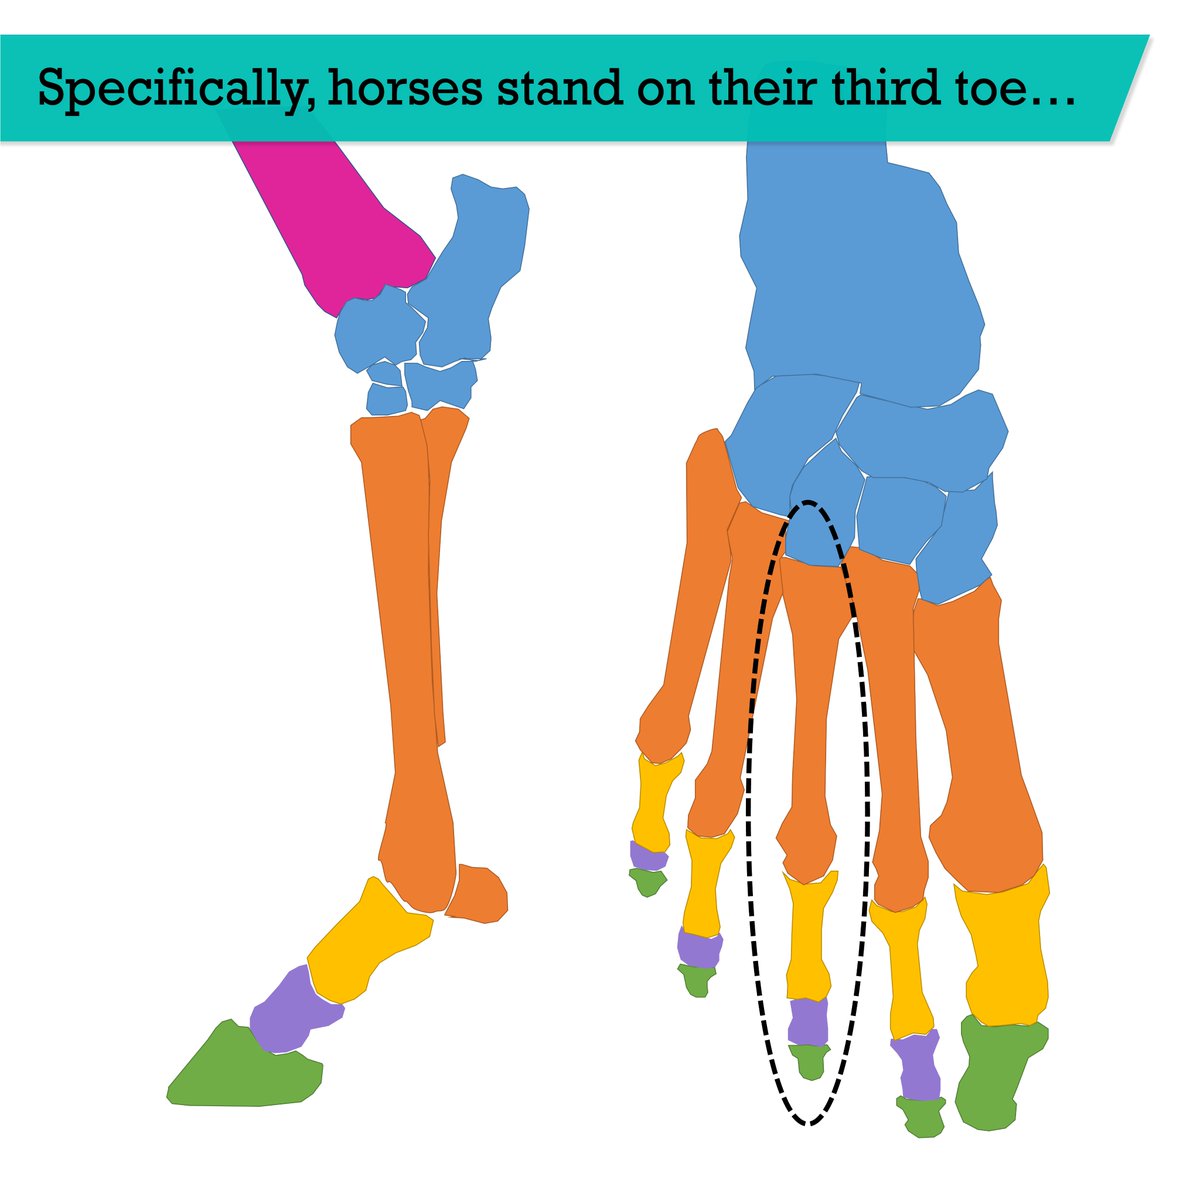 Both stand on the tips of their toes, otherwise known as the distal phalanges (in green on the image). 

Specifically, horses stand on what is equivalent to the third toe in humans (or 3rd distal phalanx).

#anatomyfacts #comparativeanatomy